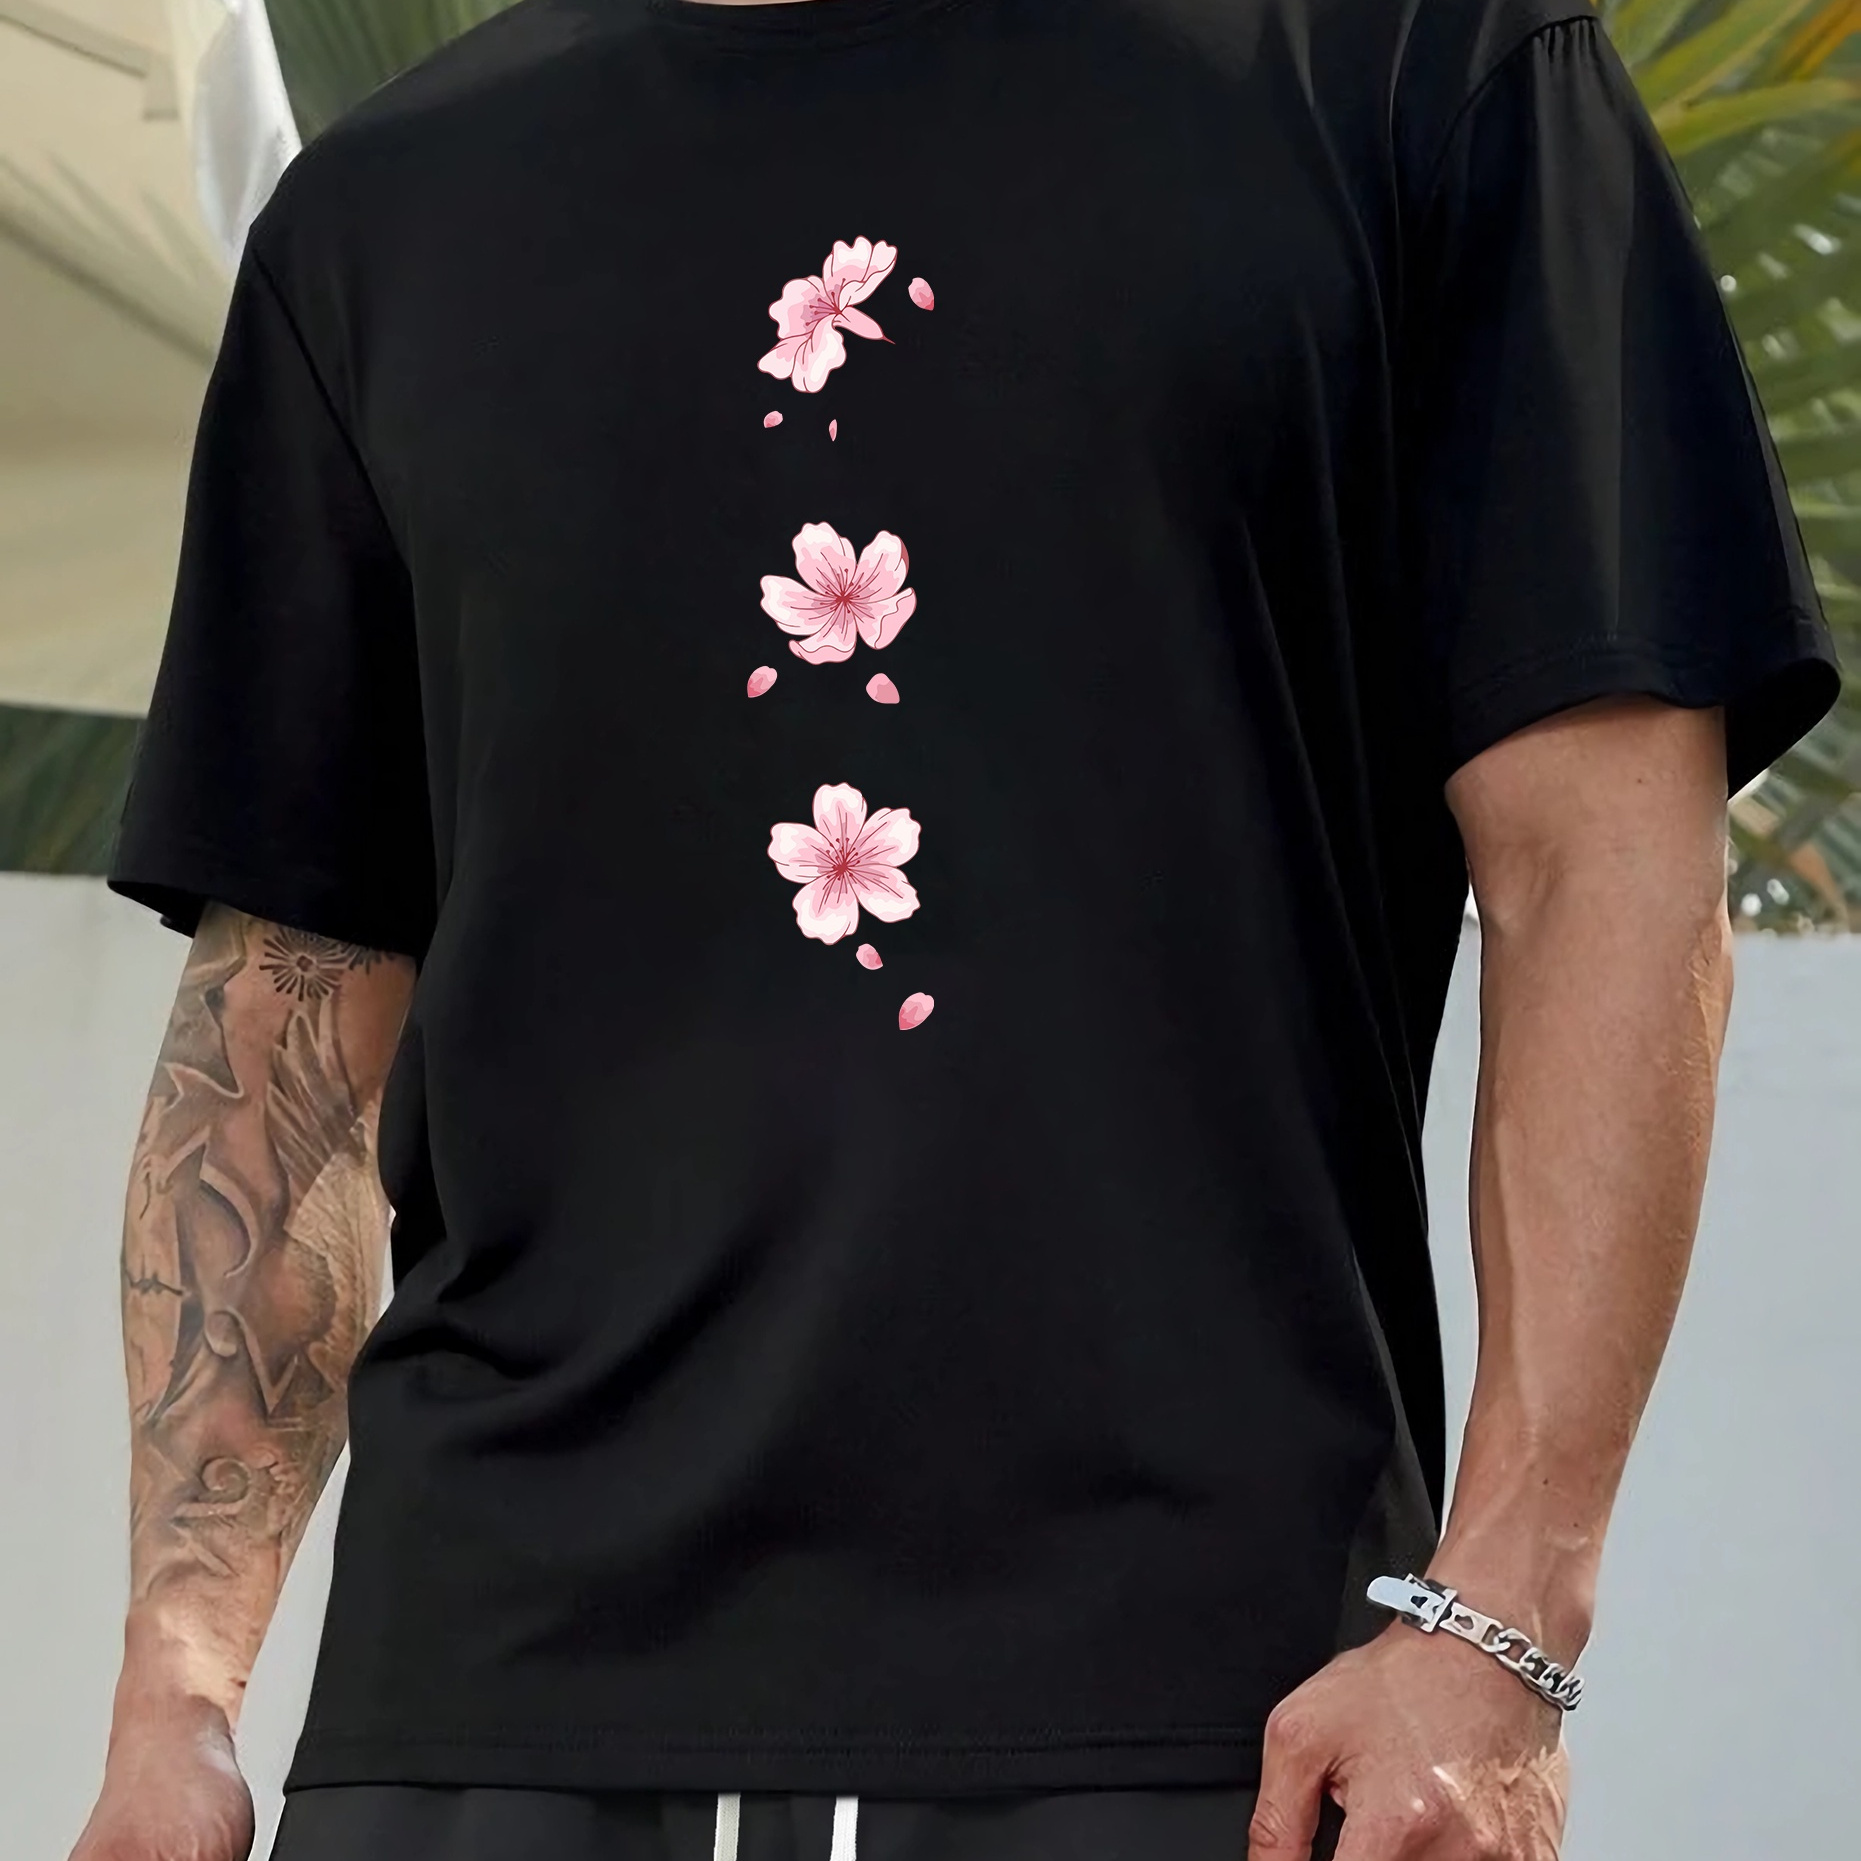 

Peach Flower Print Men's Round Neck Short Sleeve Tee Fashion Regular Fit T-shirt Top For Spring Summer Holiday